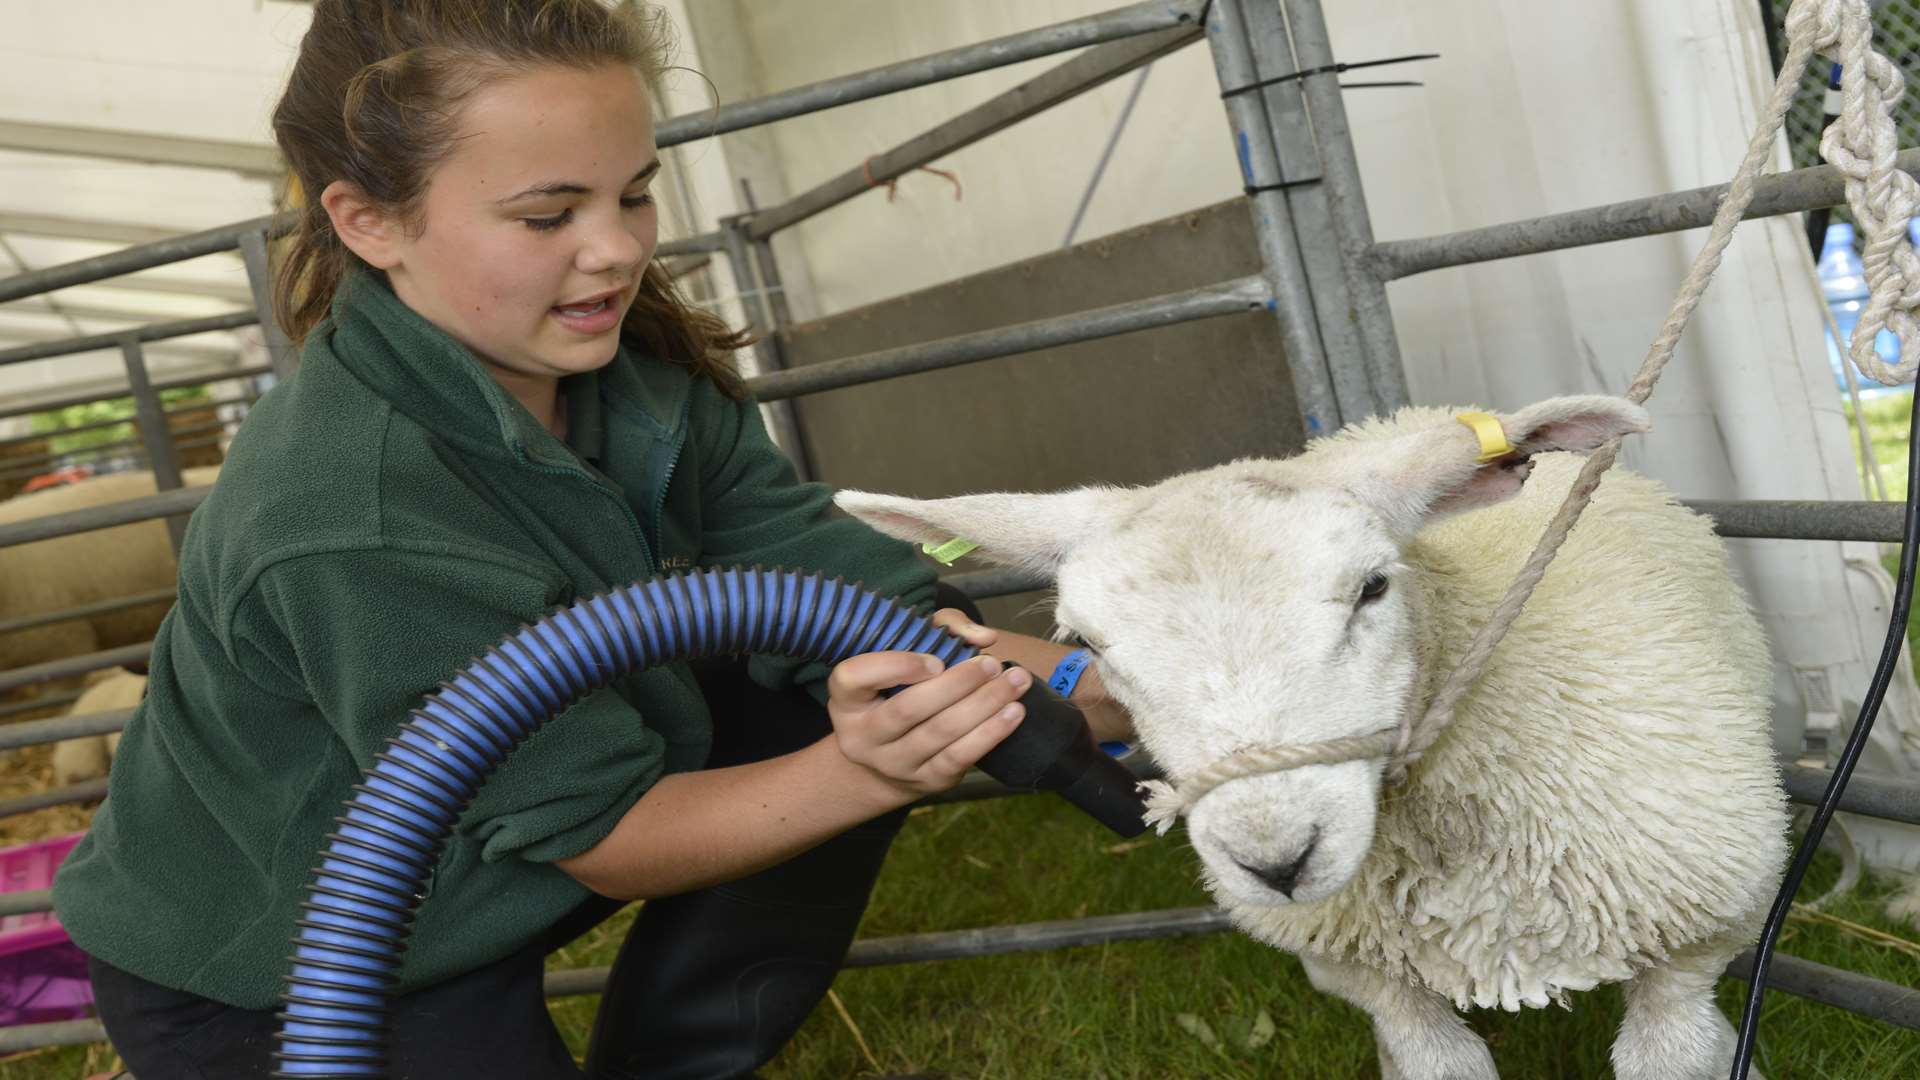 This year's Kent County Show runs from on Friday, July 8 to Sunday, July 10